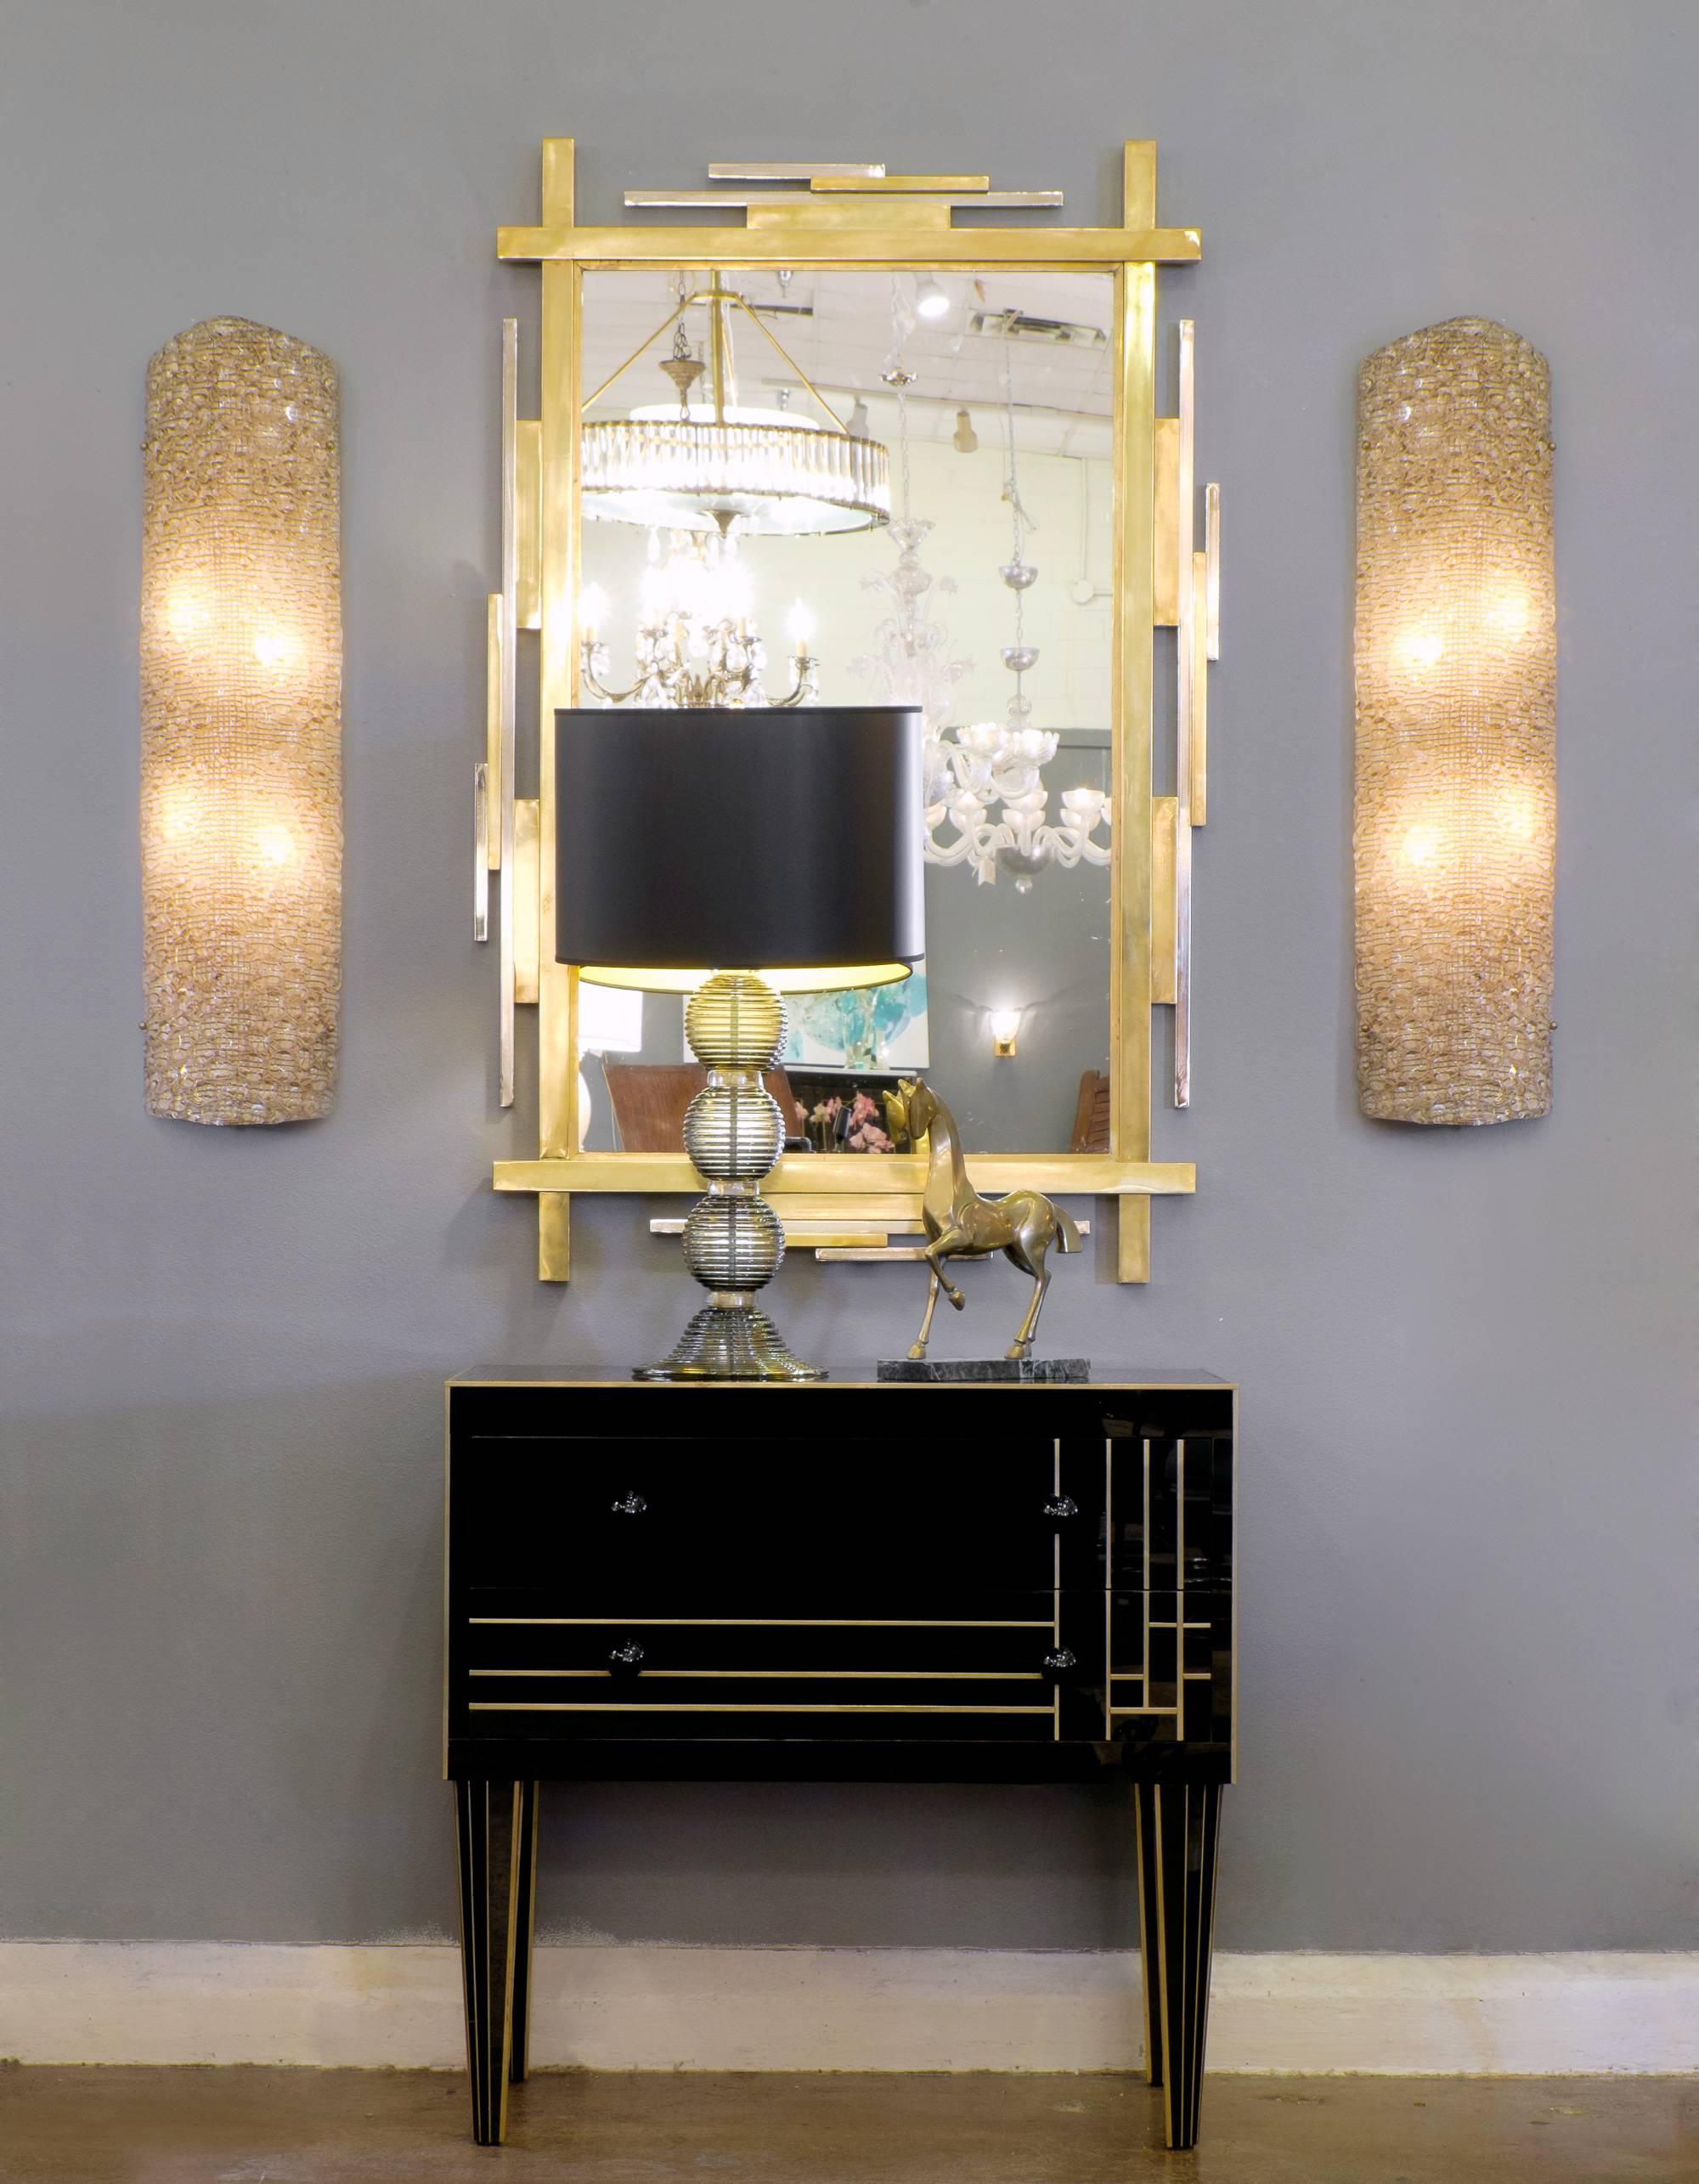 French vintage pair of mirrors in the style of Paul Evans with modernist brass and chrome frames. Exquisite style and craftsmanship.